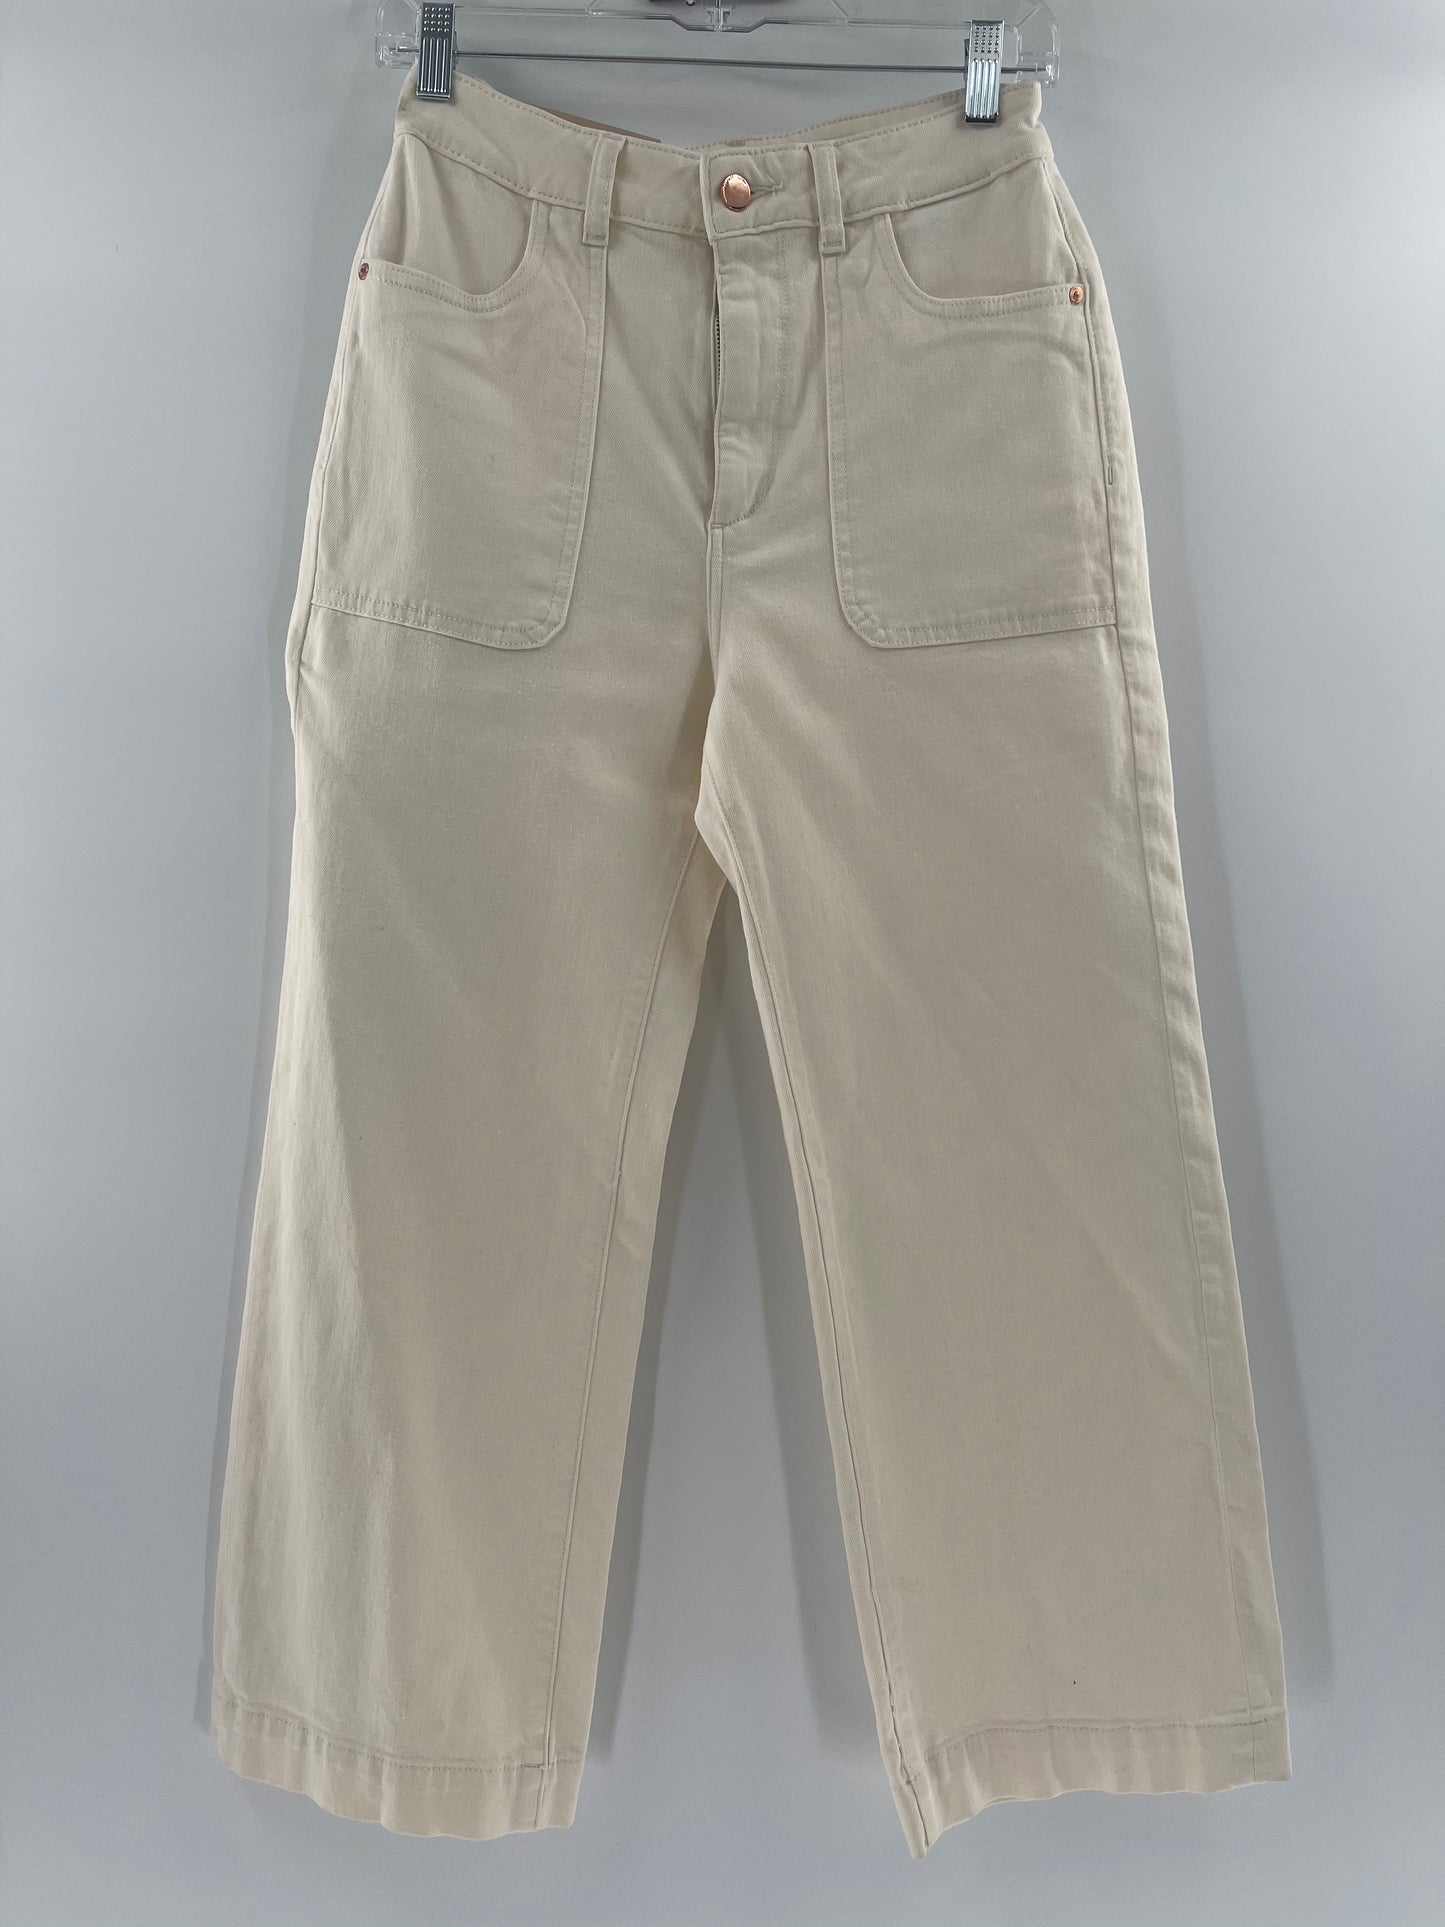 D1 1961 White Anthropologie High Rise Wide Leg Jeans (Size 27)